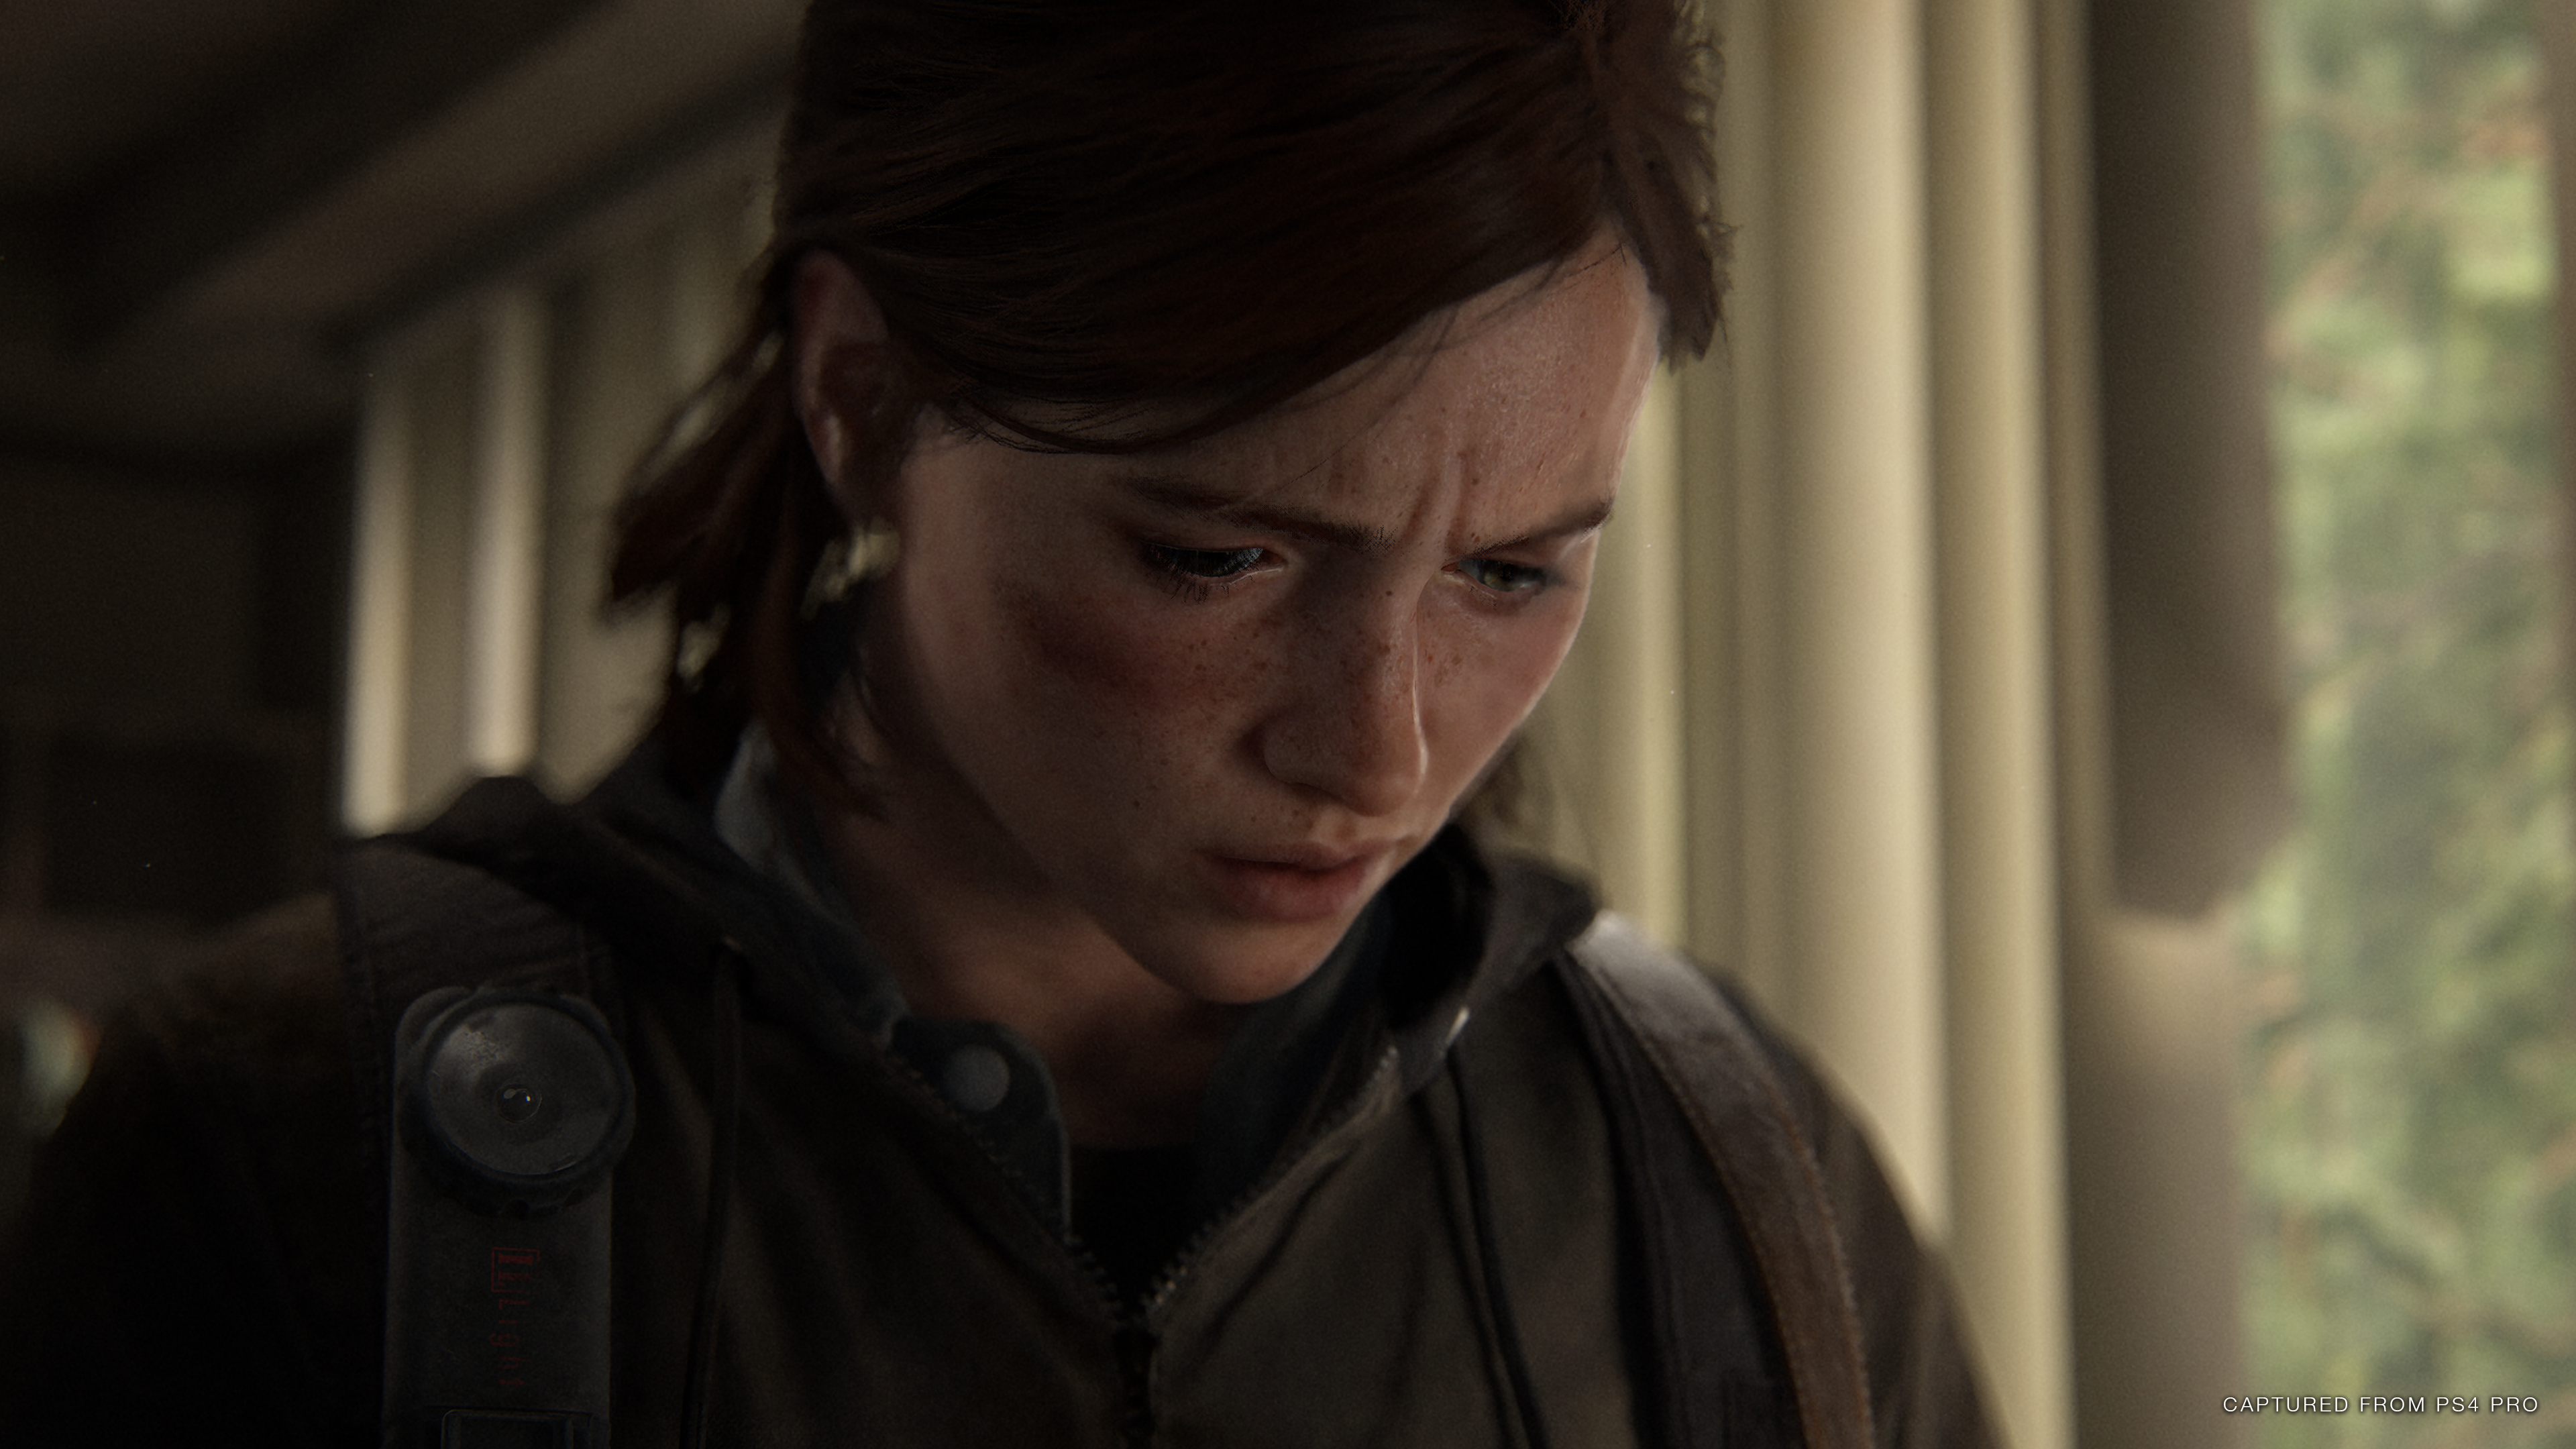 Ellie in Apolo 11 The Last of Us Wallpapers